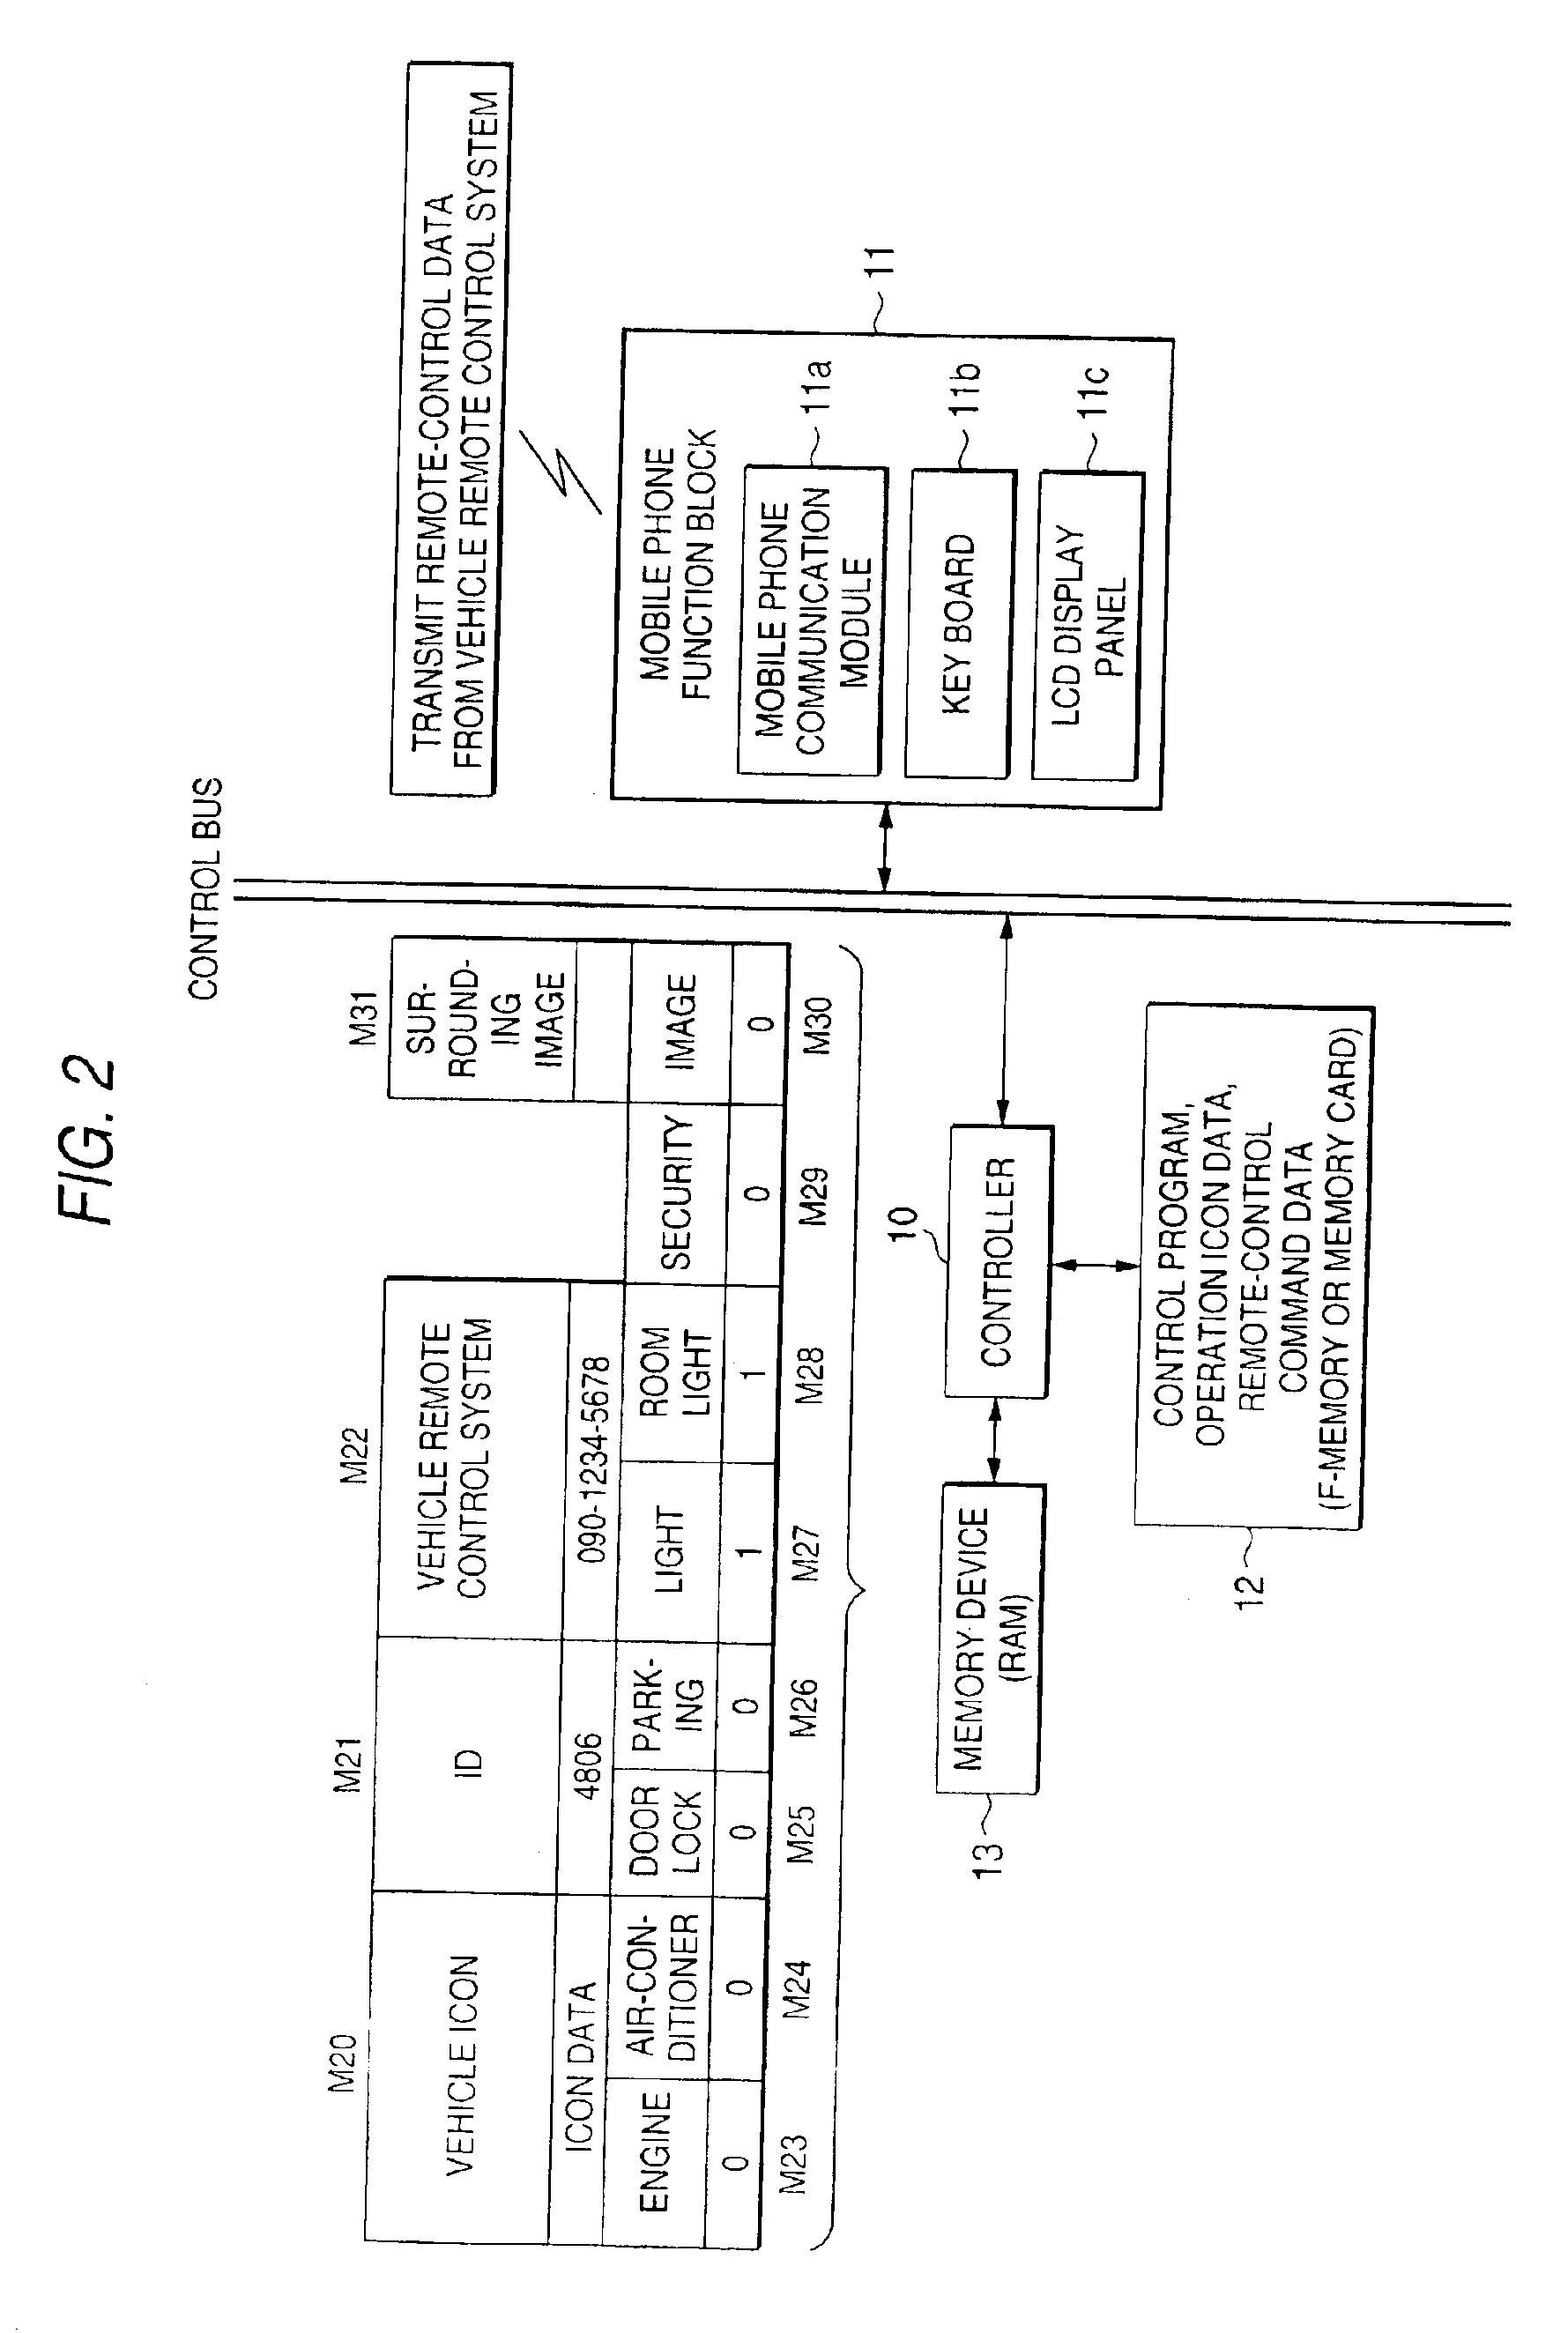 Car control system and vehicle remote control system